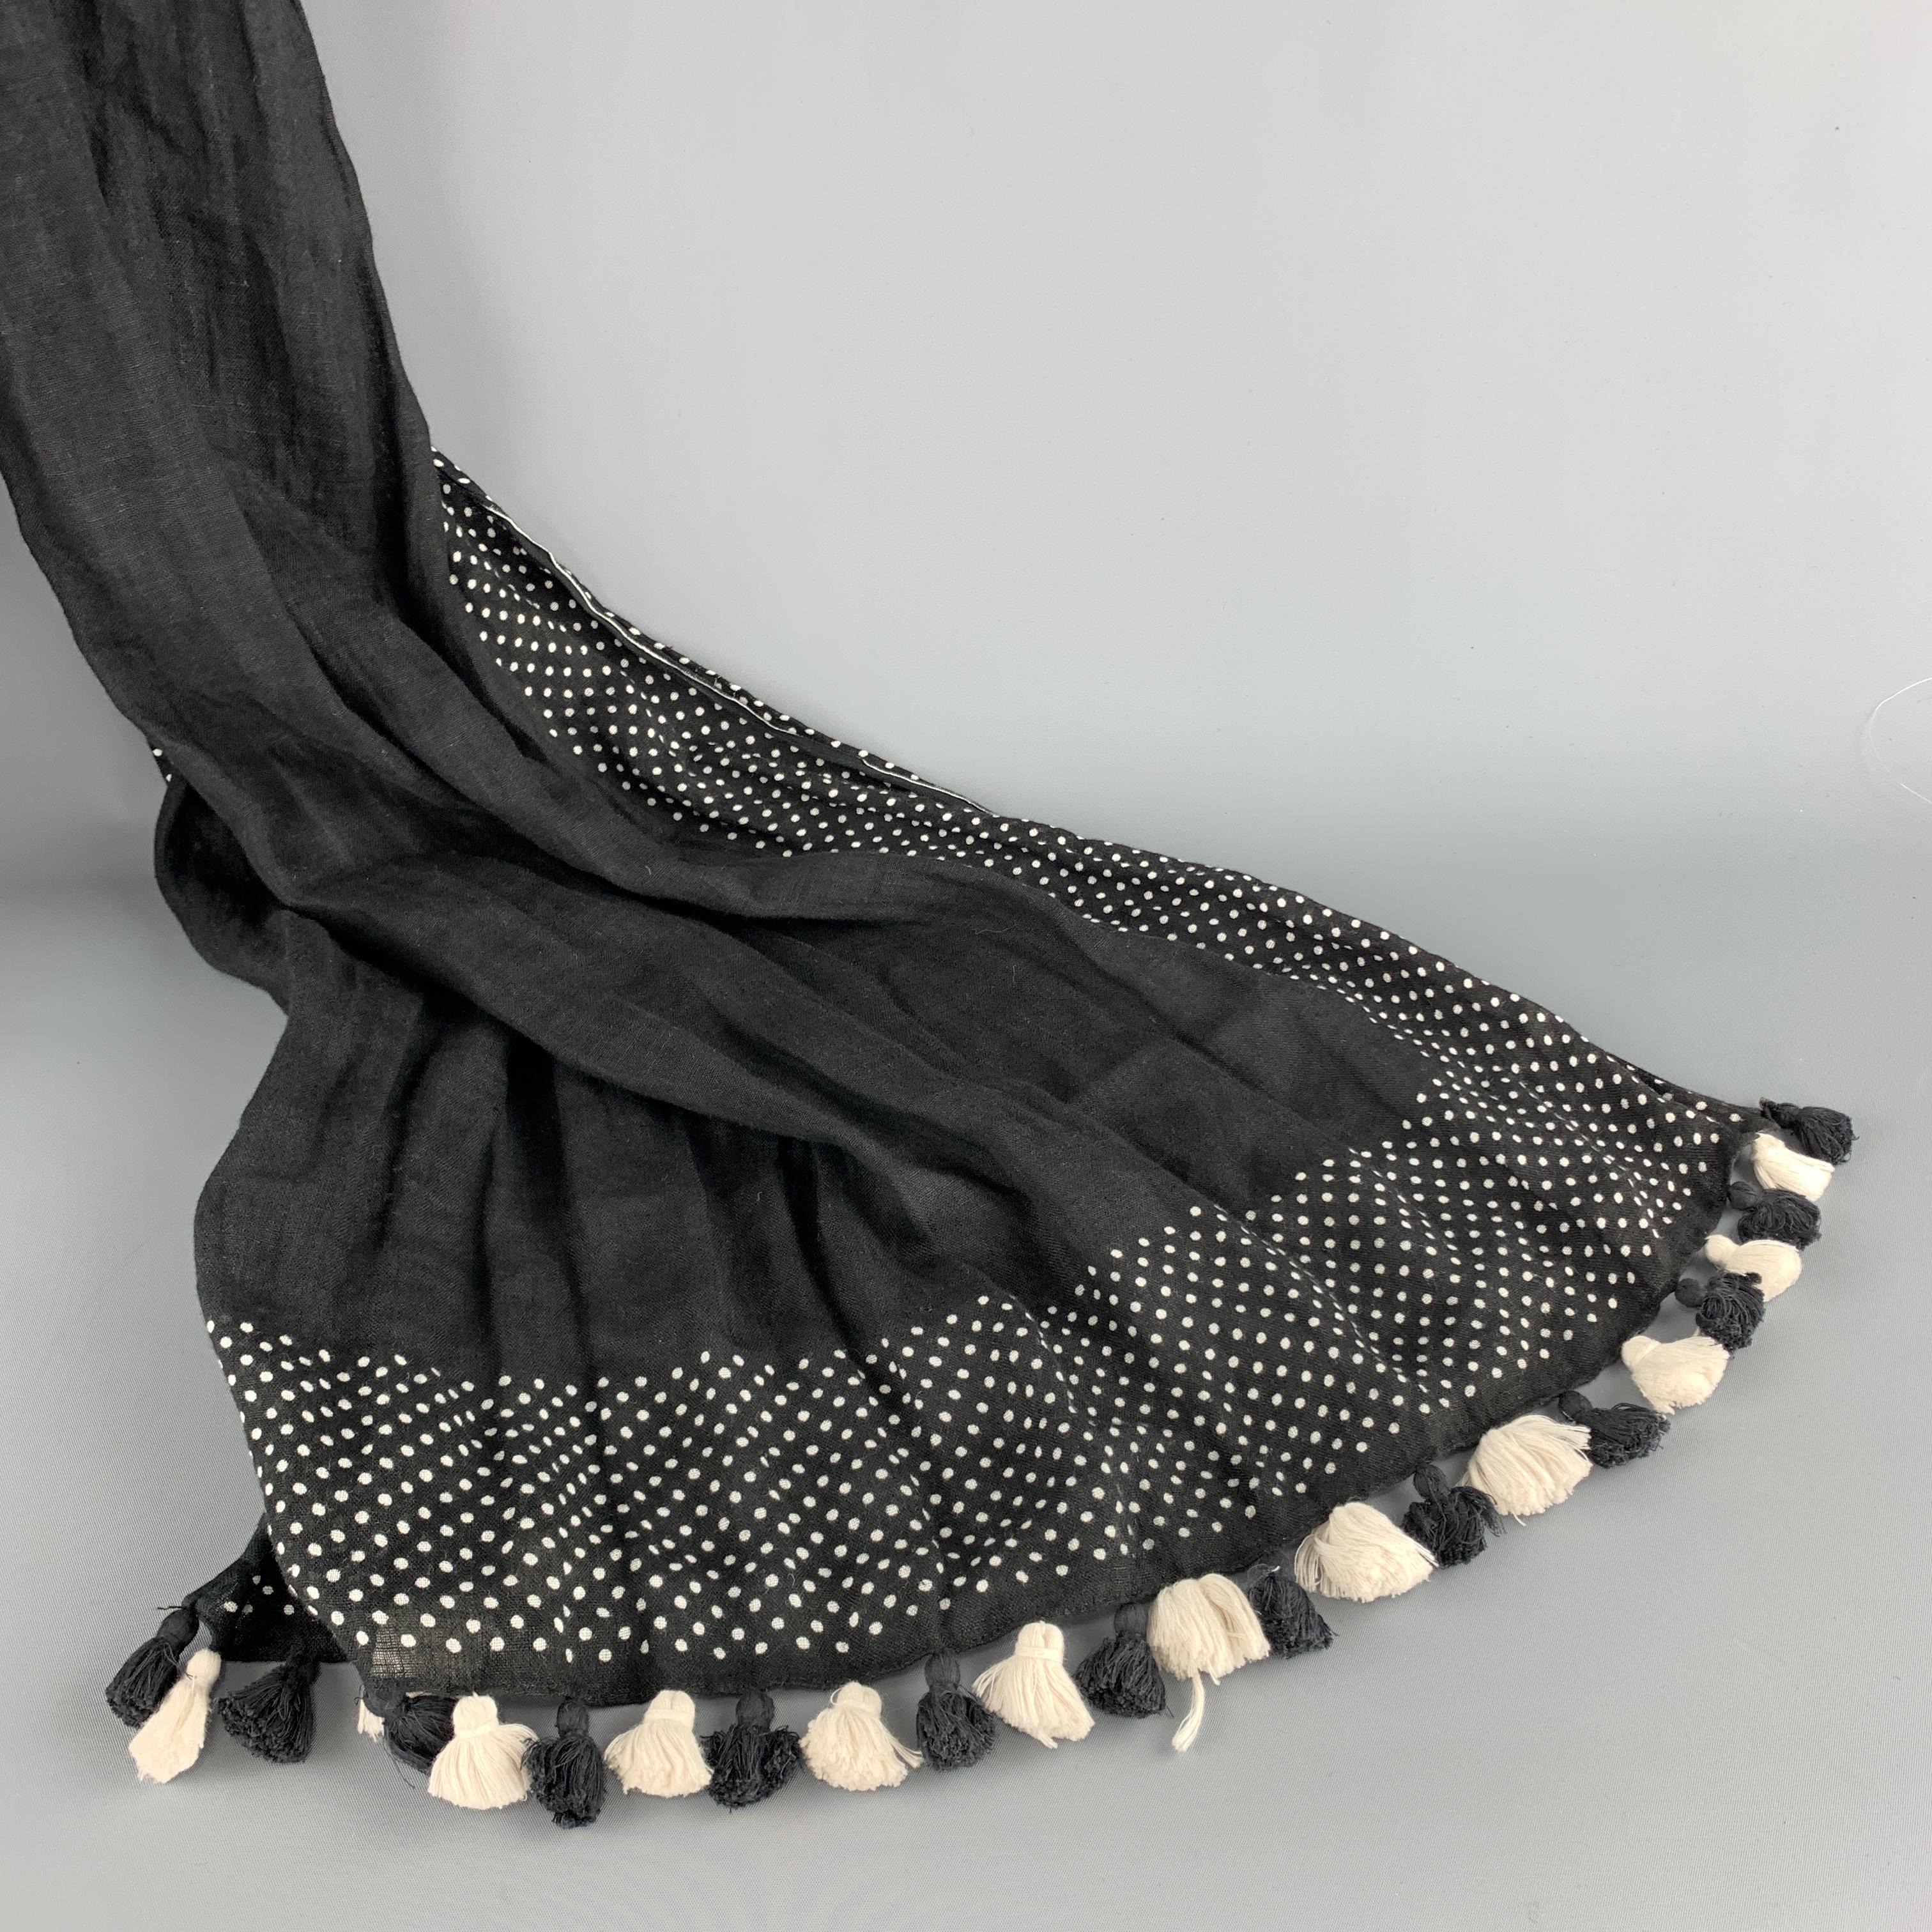 COMME des GARCONS TRICOT shawl scarf comes in black and white speckled linen with micro polka dot panels and tassel fringe trim. 

Excellent Pre-Owned Condition.

Length: 70 in.
Width: 29 in.